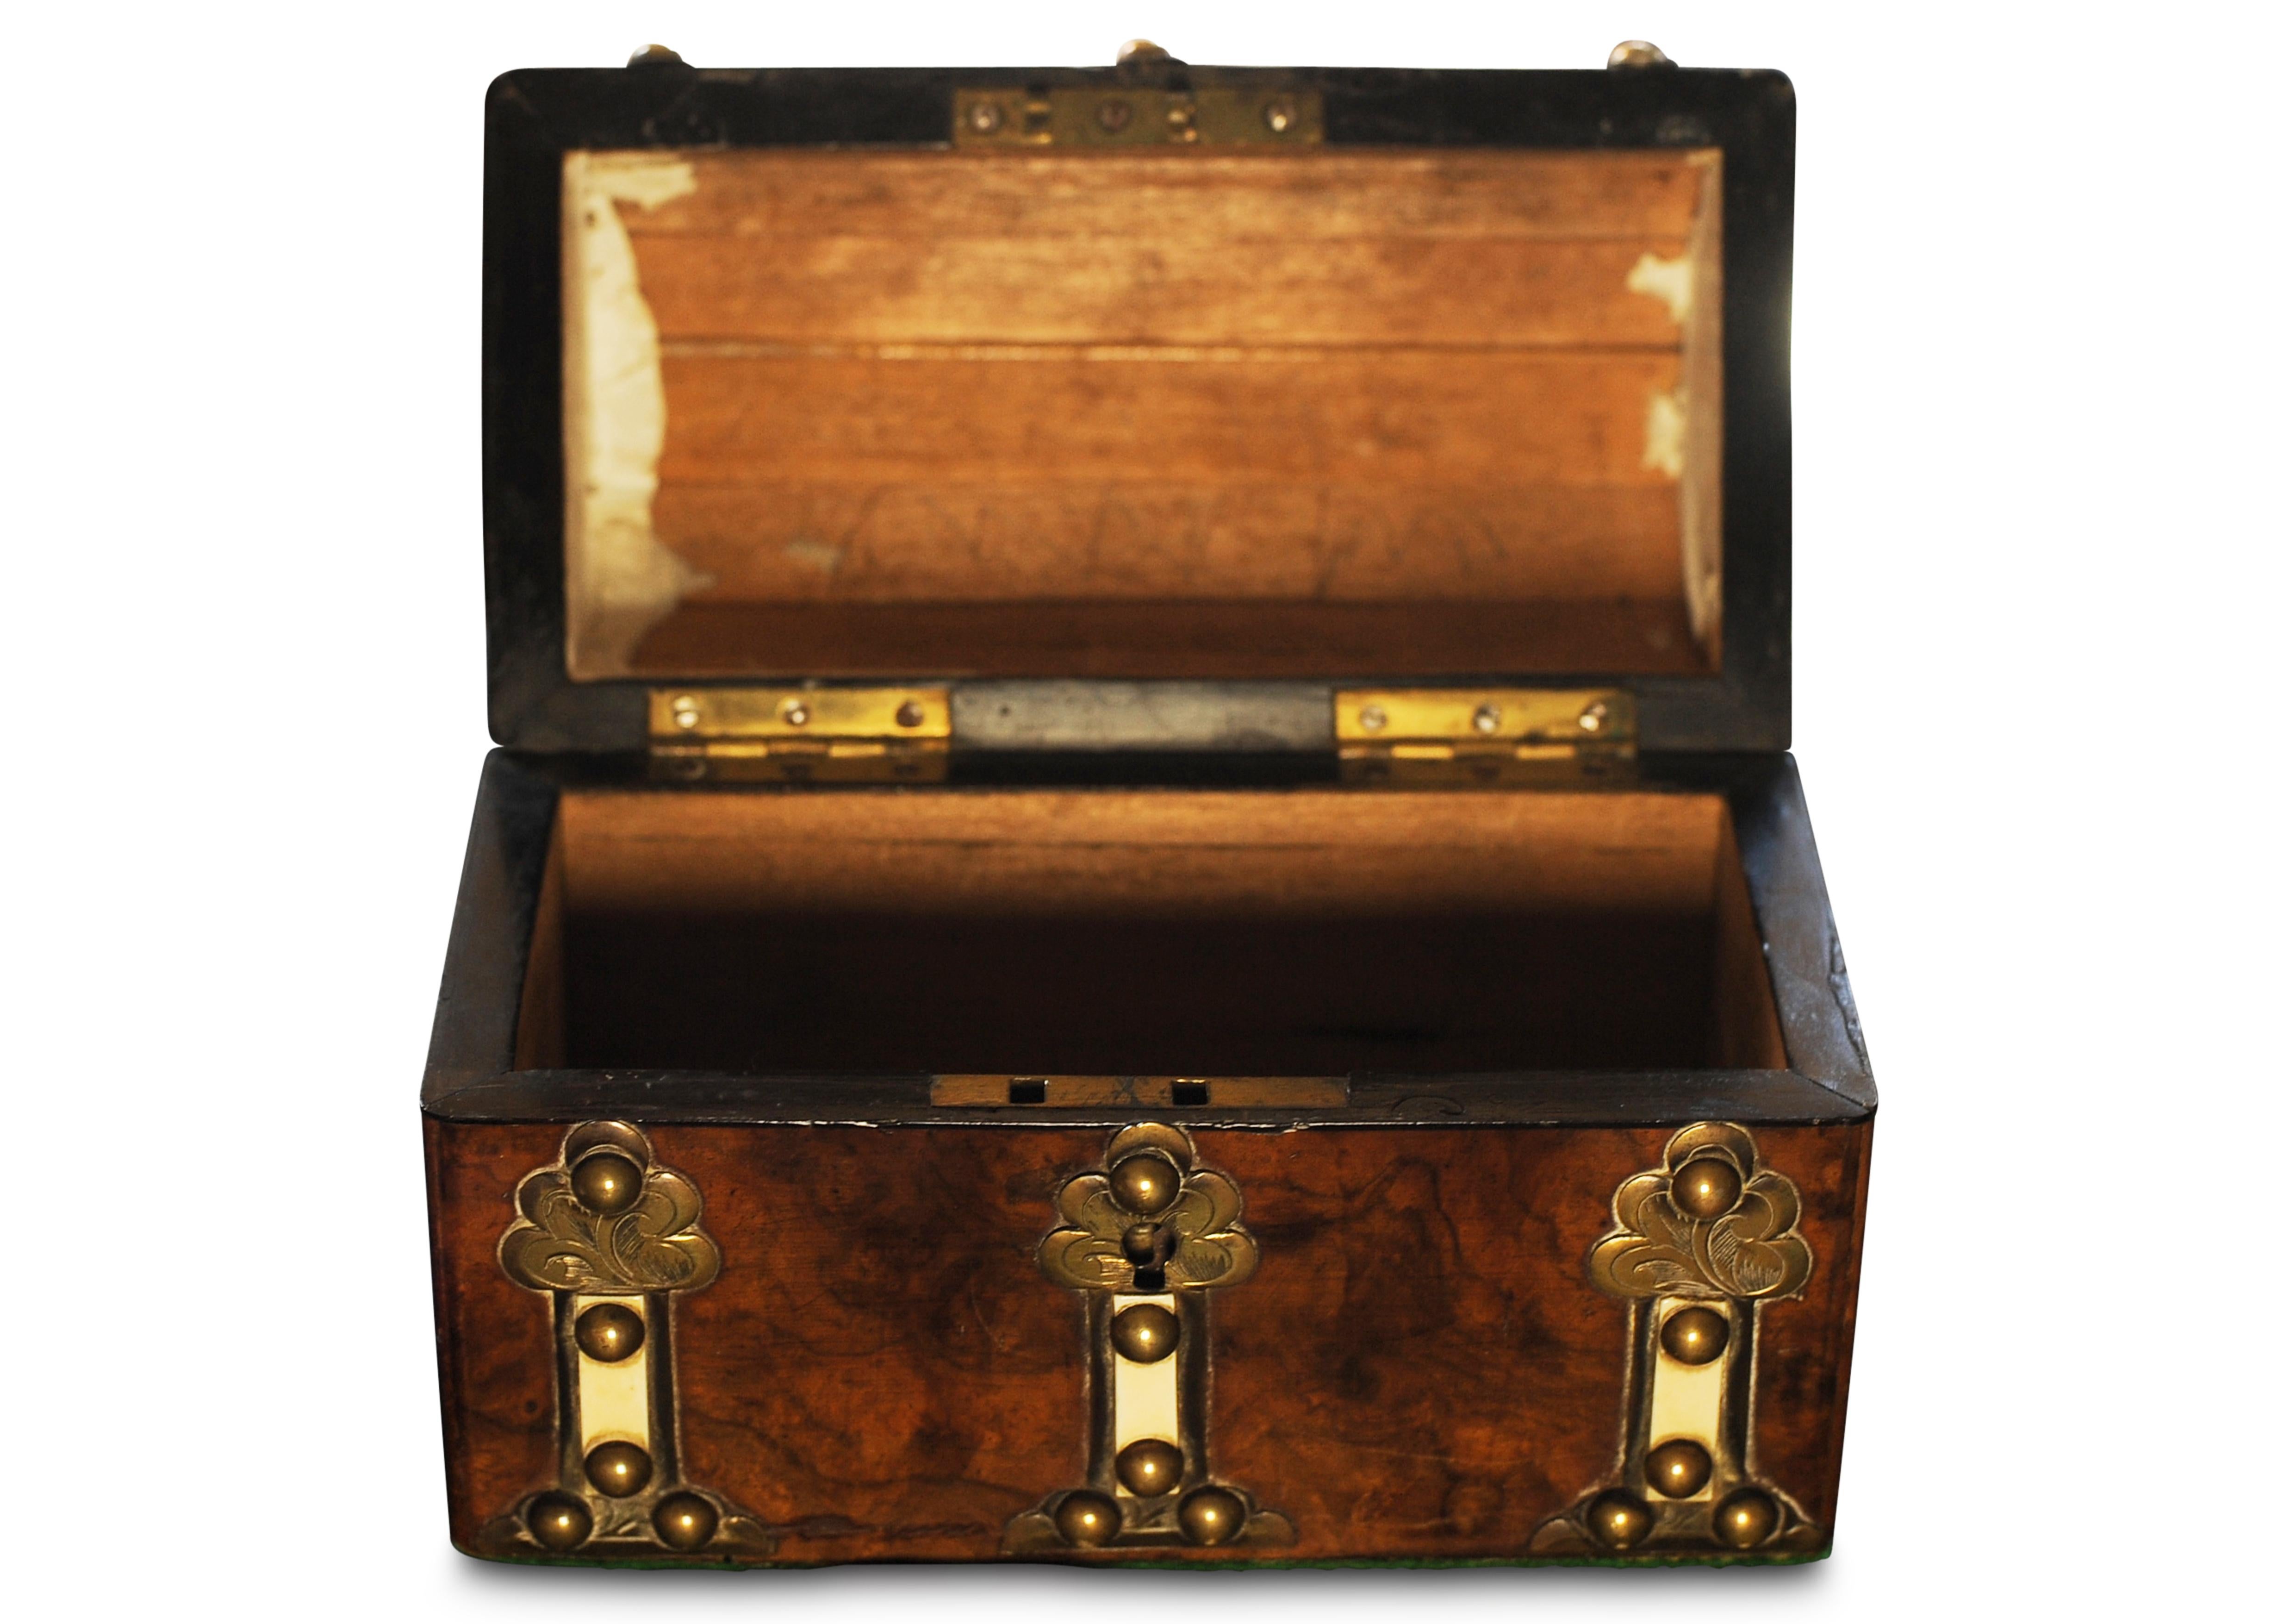 Victorian Burr Walnut Small Keepsake Chest With Engraved Brass Details & Cream Leather Supports 1800's 